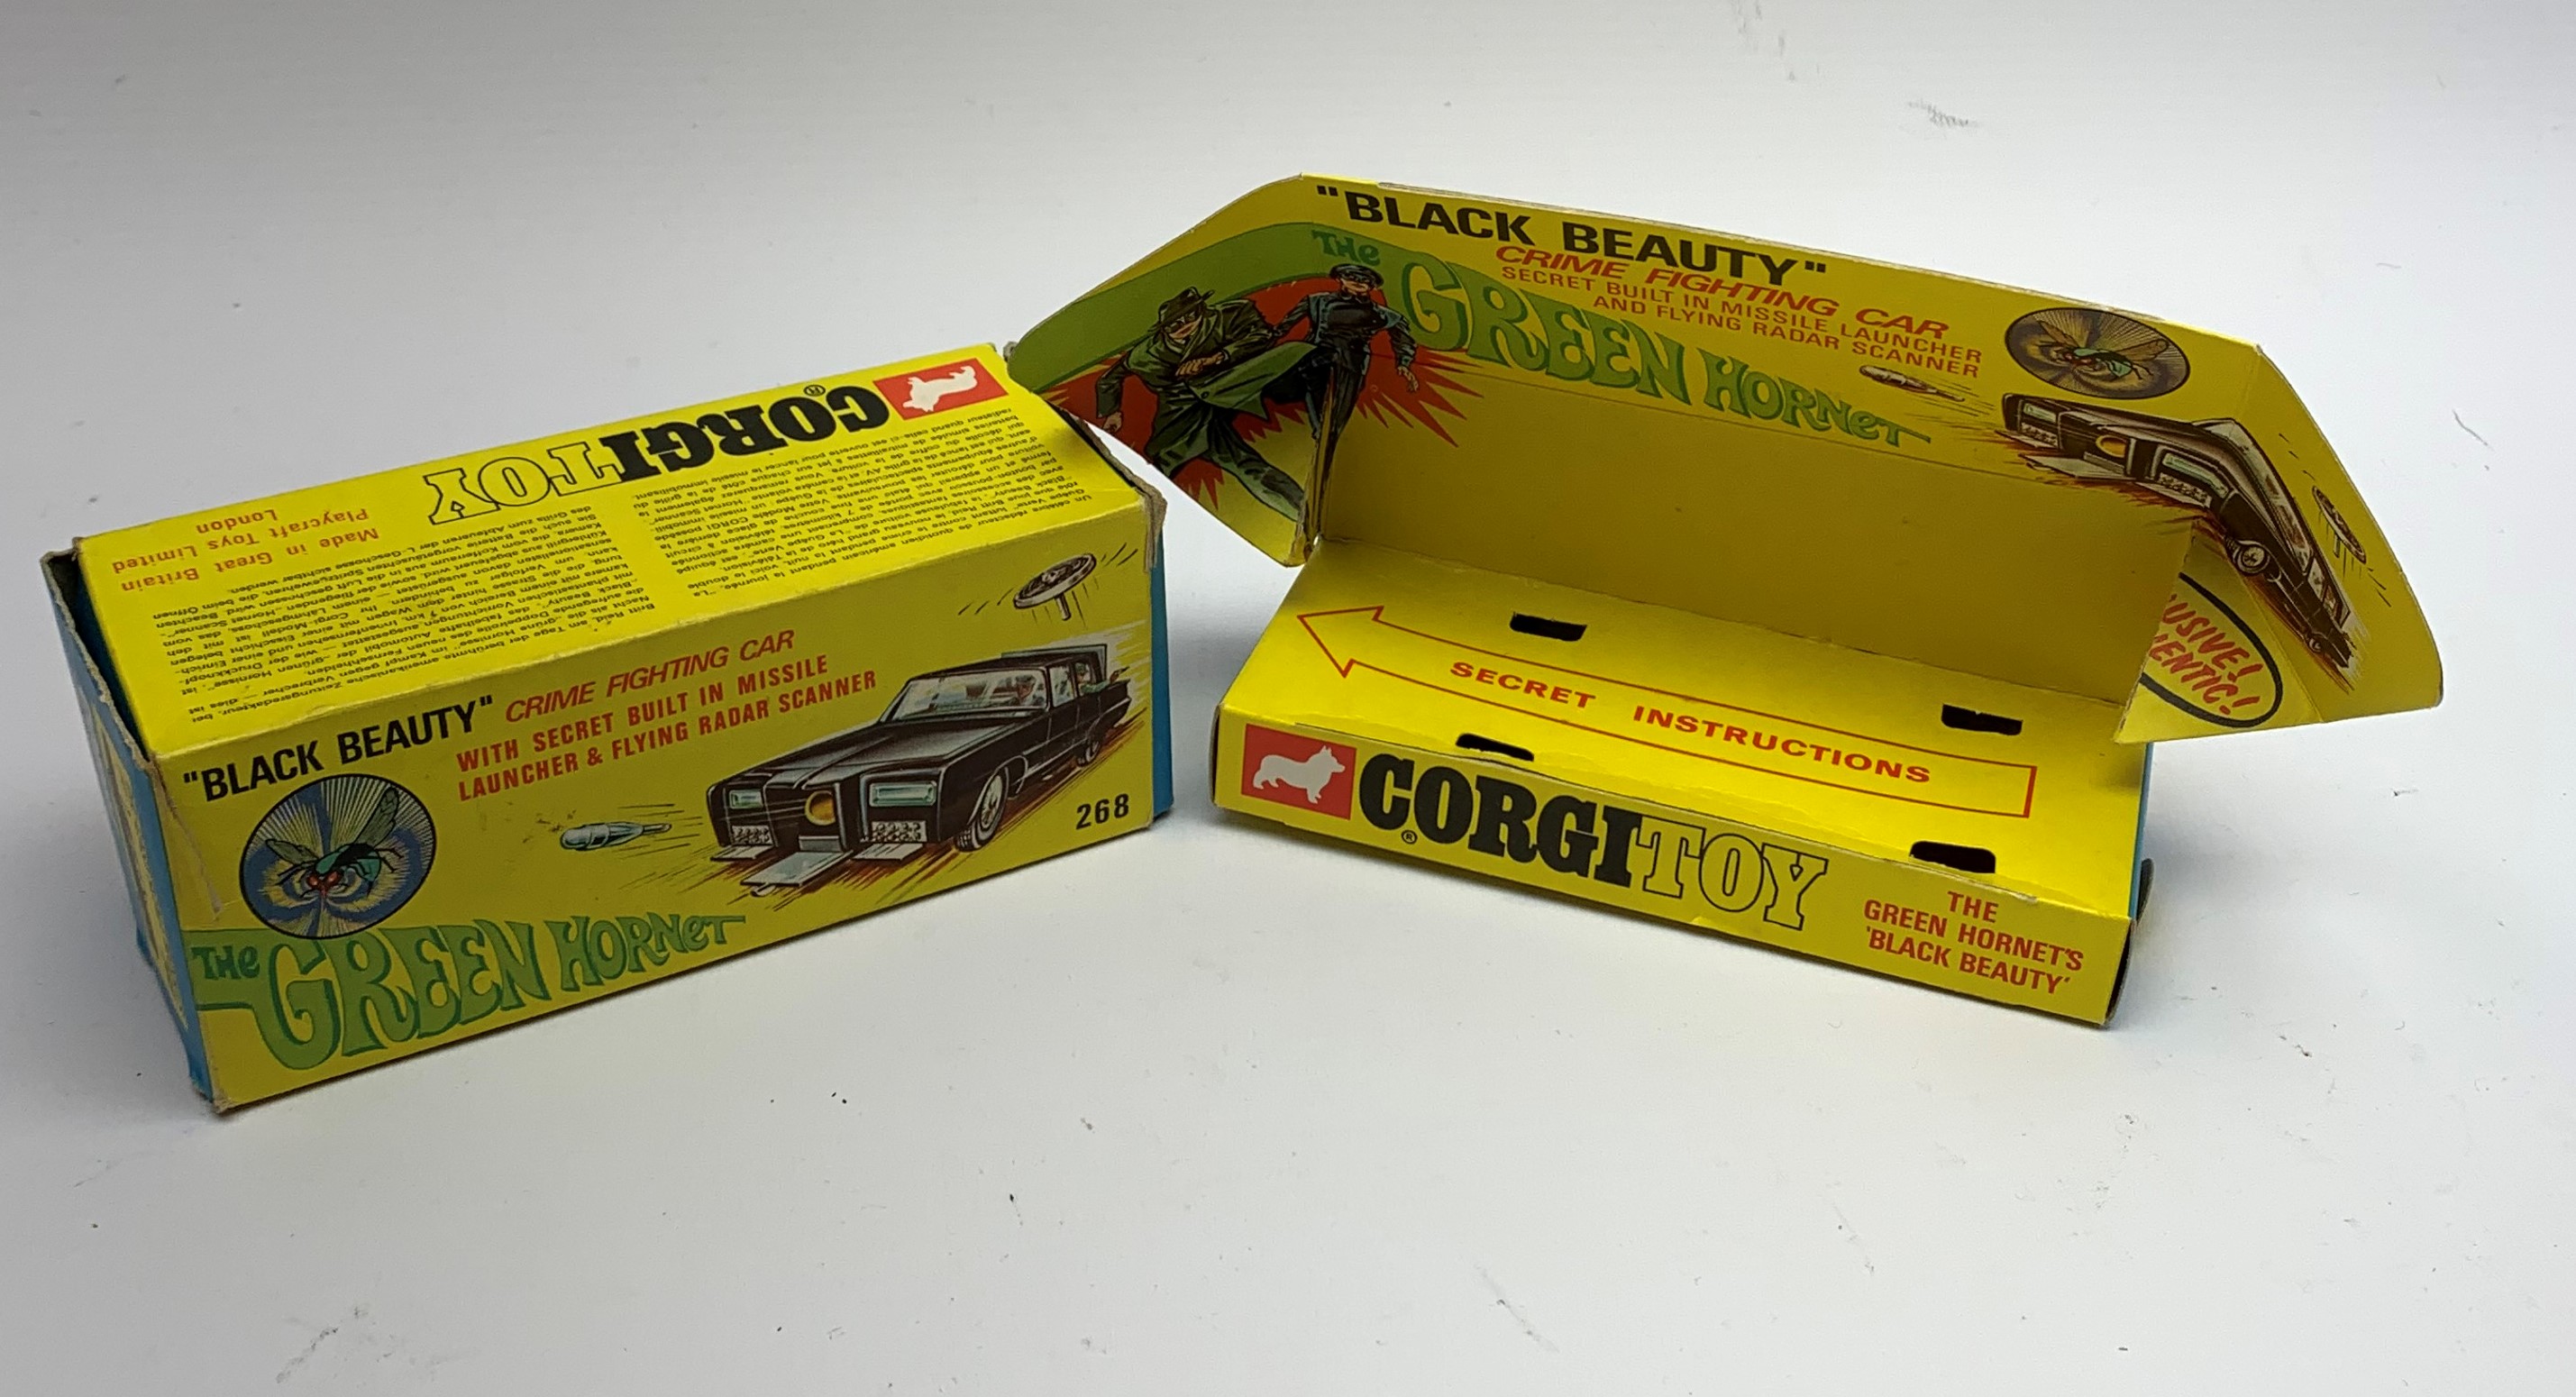 Corgi - Green Hornet Black Beauty Crime Fighting Car No.268, boxed with inner pictorial stand, three - Image 9 of 10